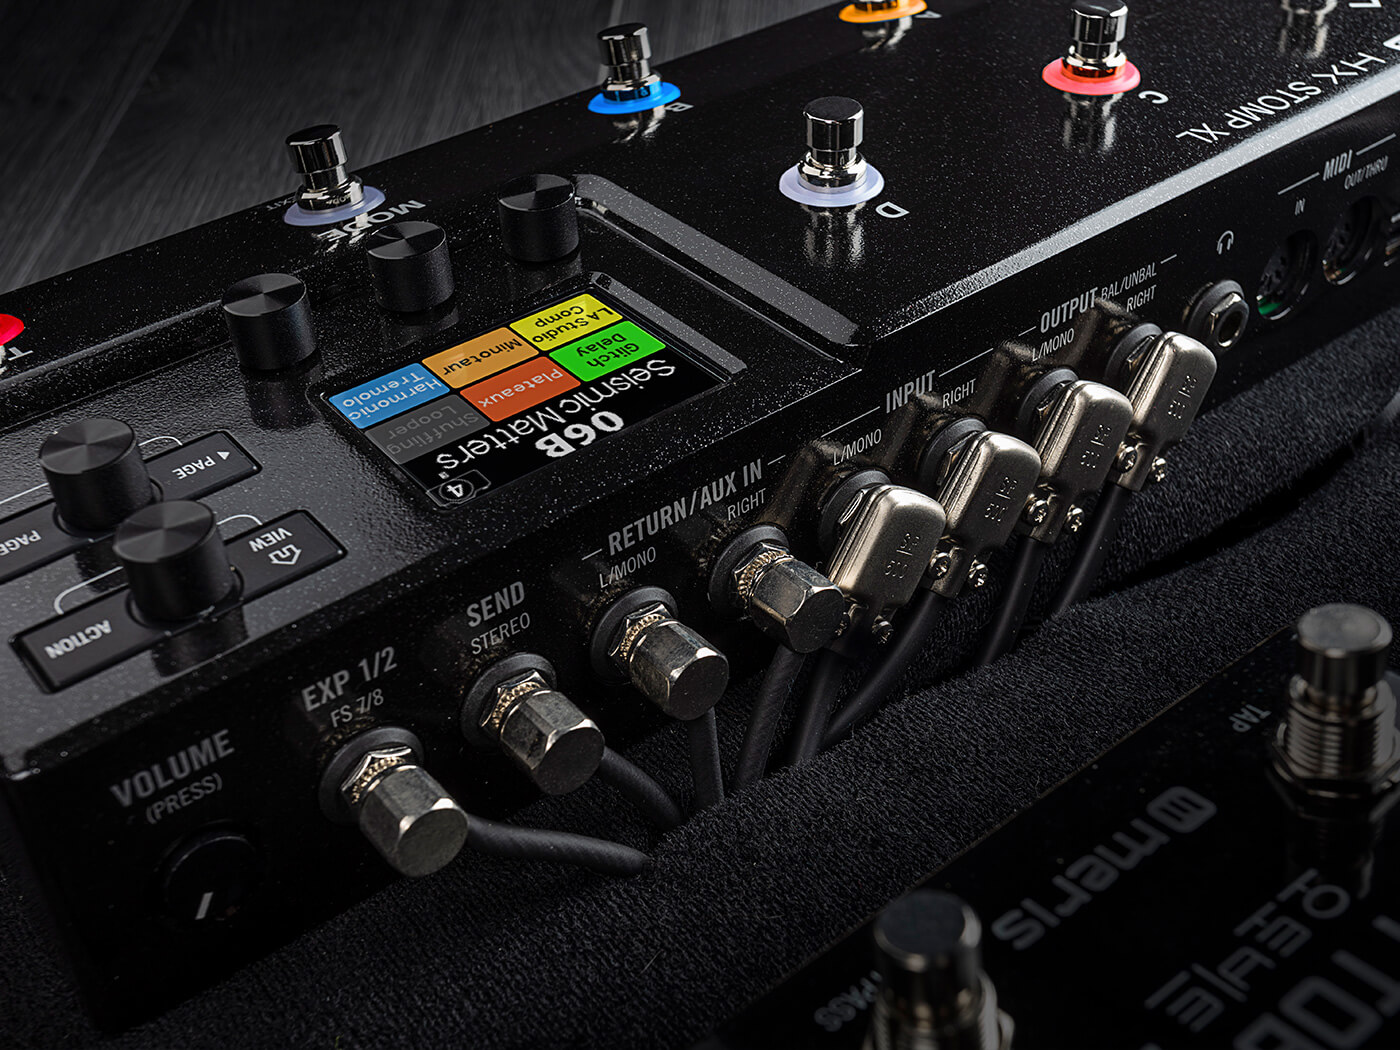 Line 6 launches the HX Stomp XL